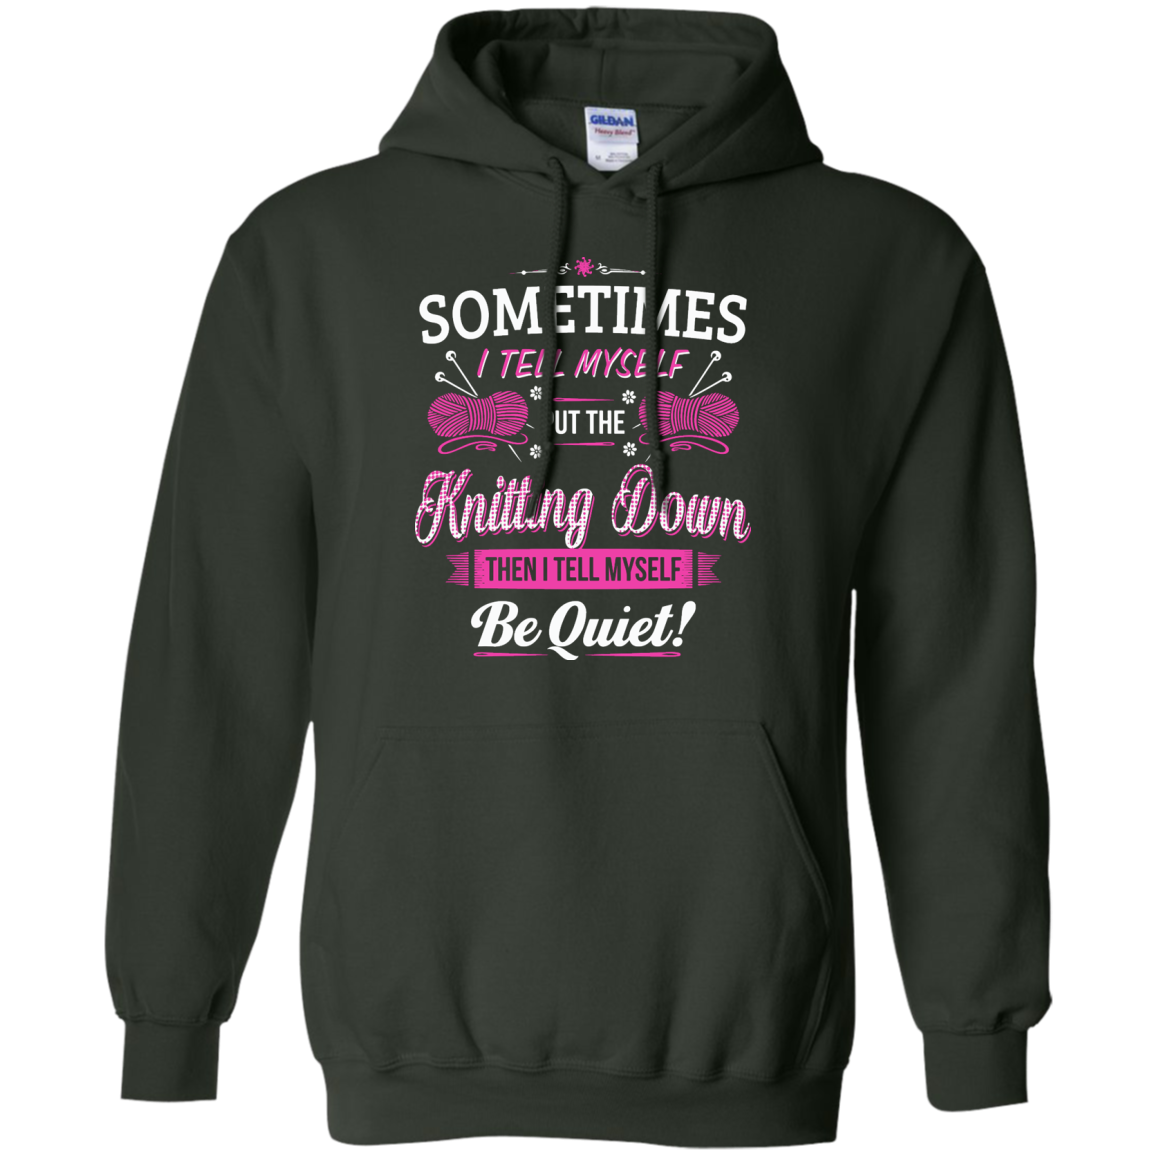 Put the Knitting Down Pullover Hoodies - Crafter4Life - 1